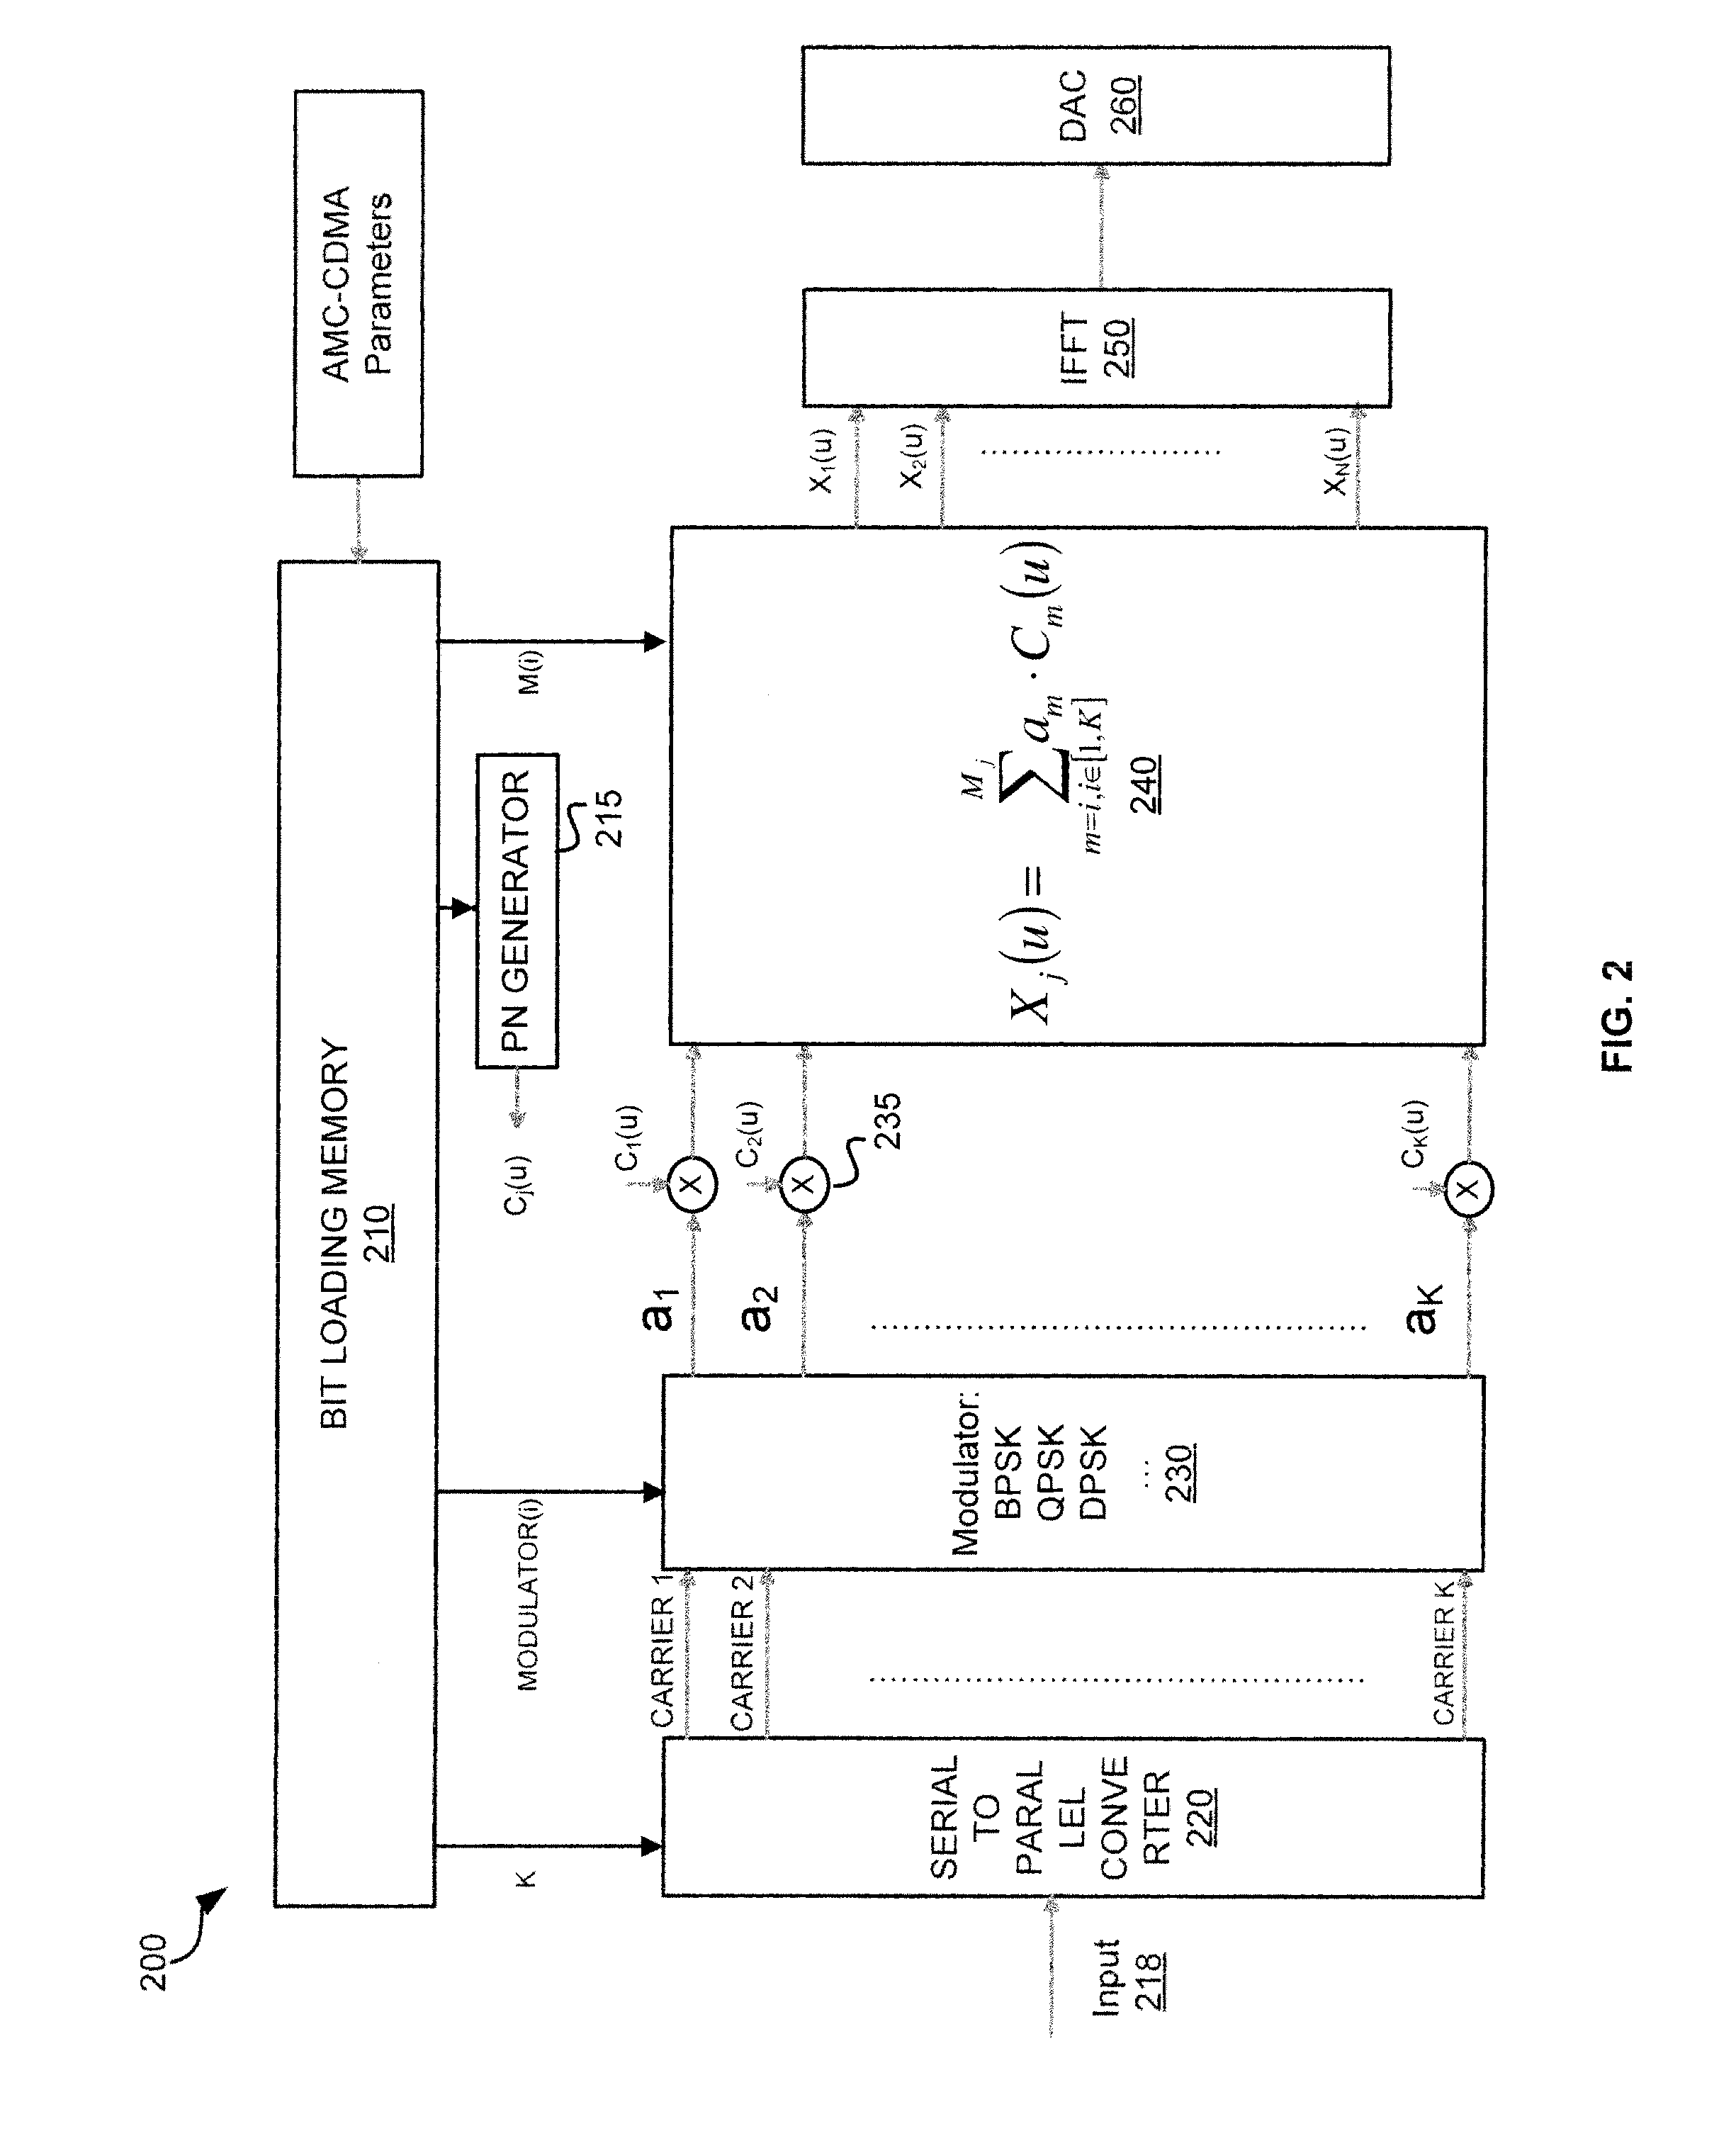 Adaptative Multi-Carrier Code Division Multiple Access